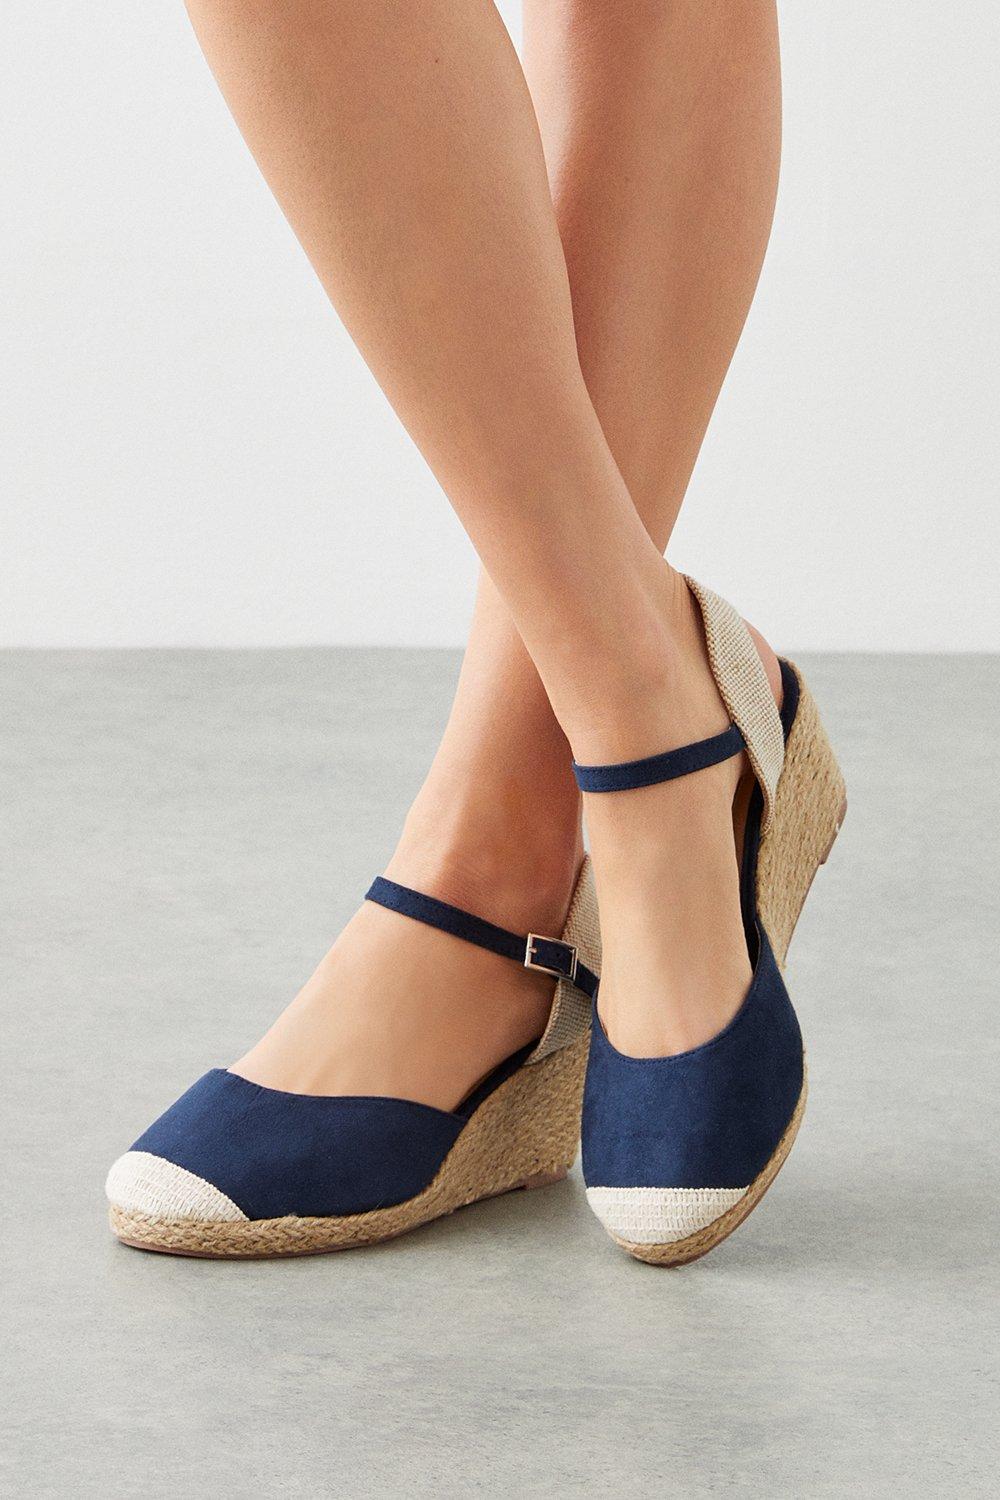 Women’s Extra Wide Fit Rolo Closed Toe Canvas Wedges - navy - 6